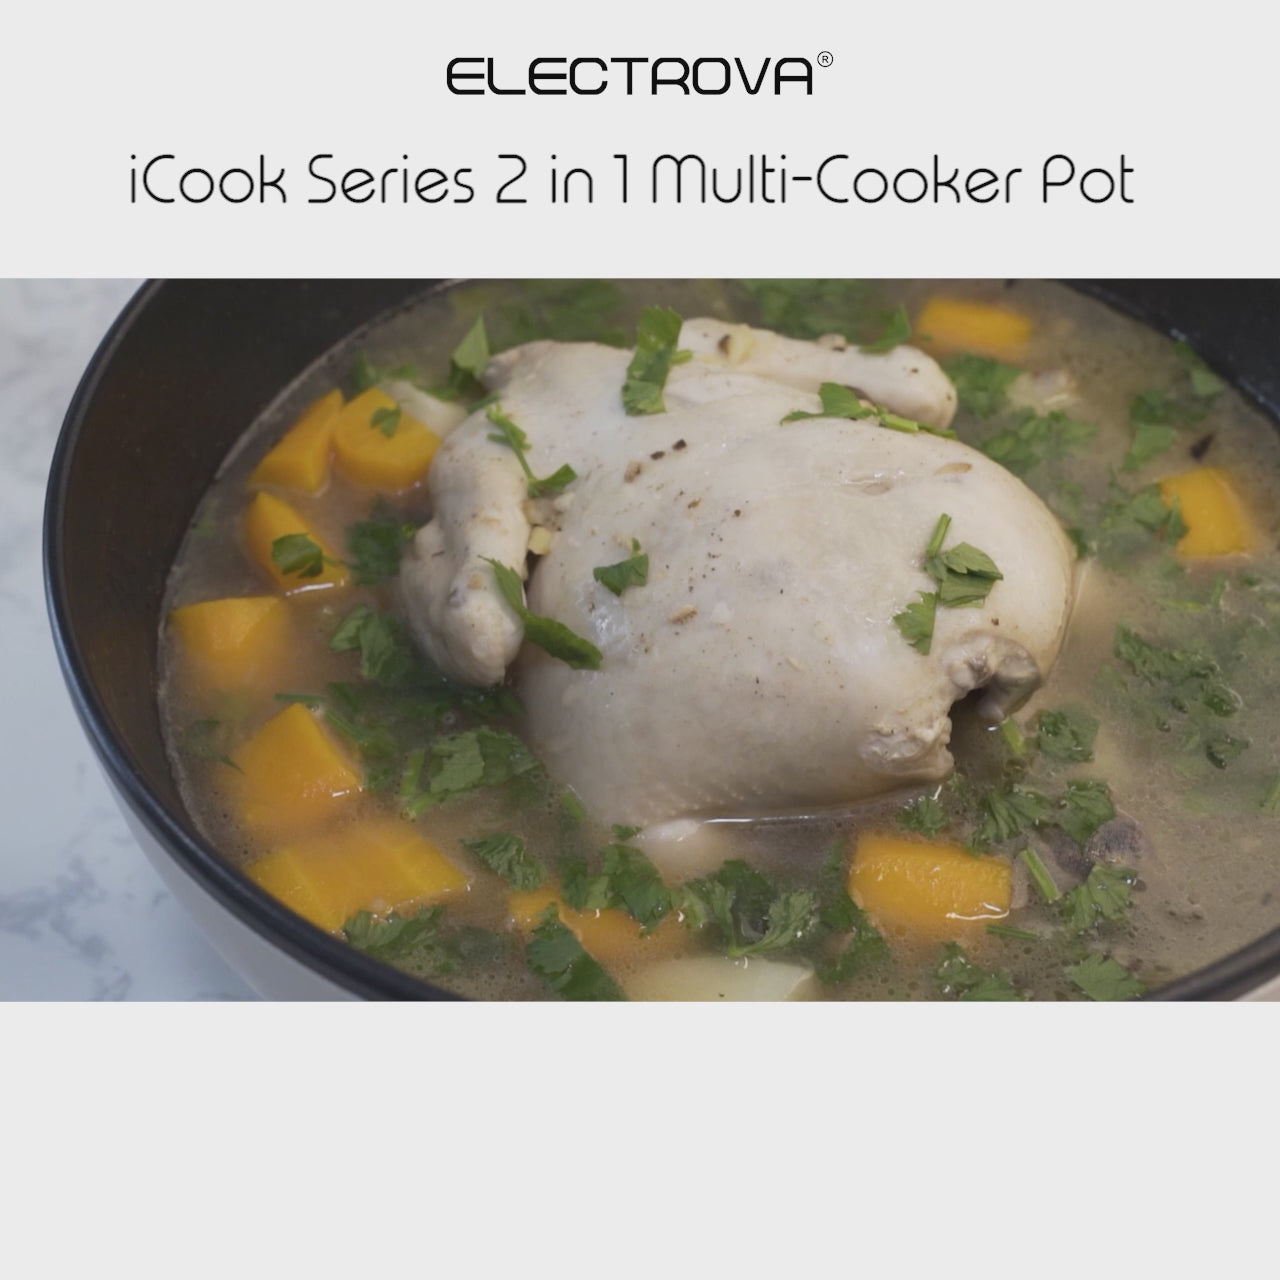 Electrova iCook Series 2 in 1 Multi- Function Cooker Pot (4L)